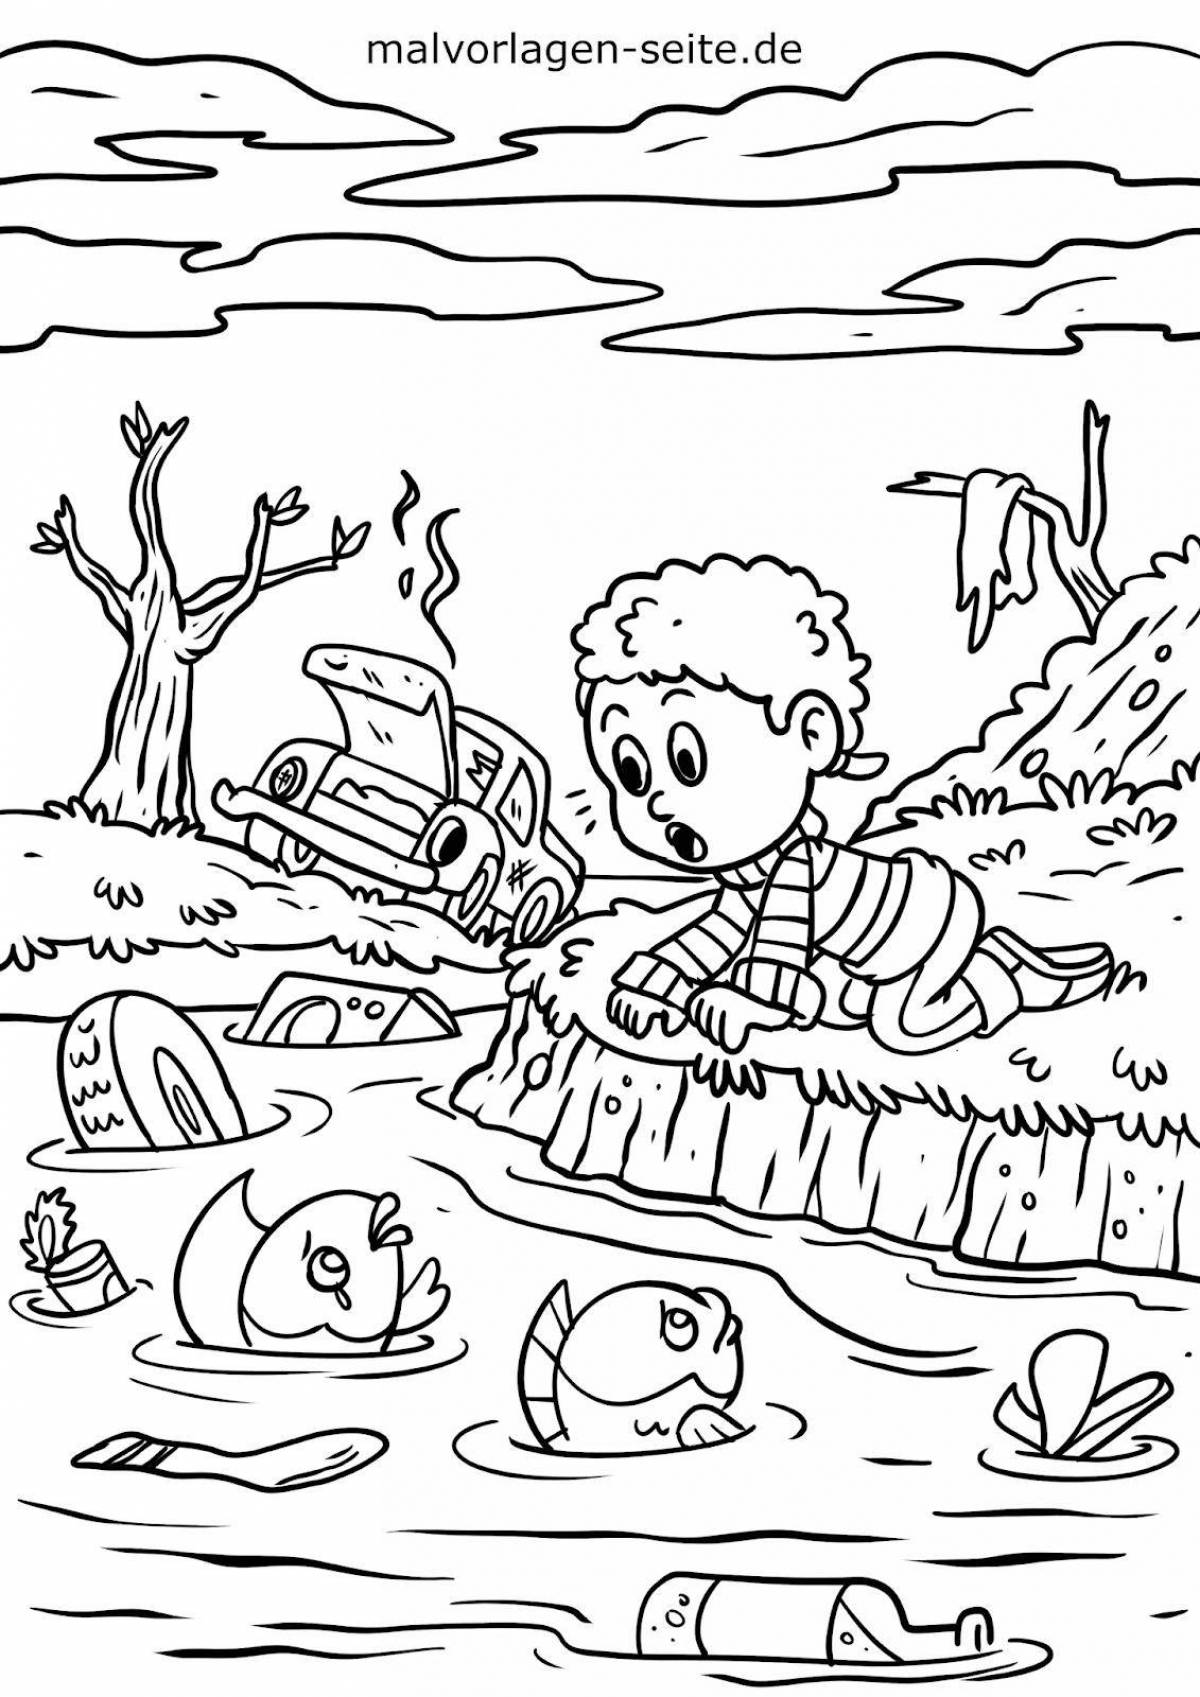 Amazing environment coloring page